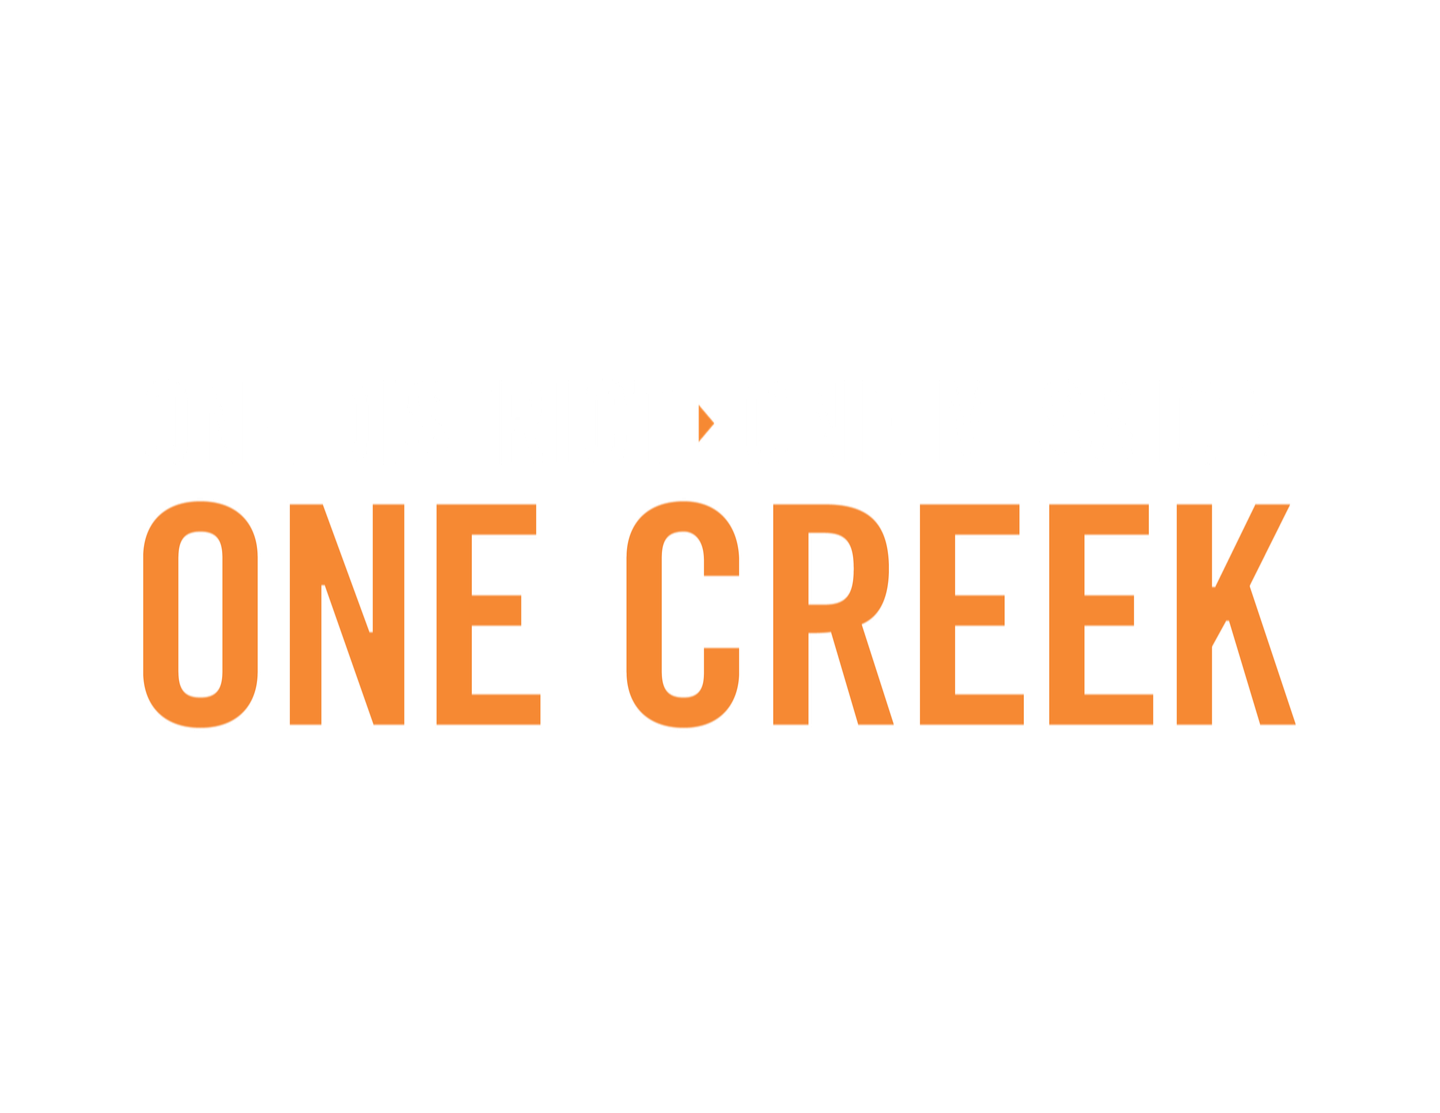 One District, One Mission, One Creek